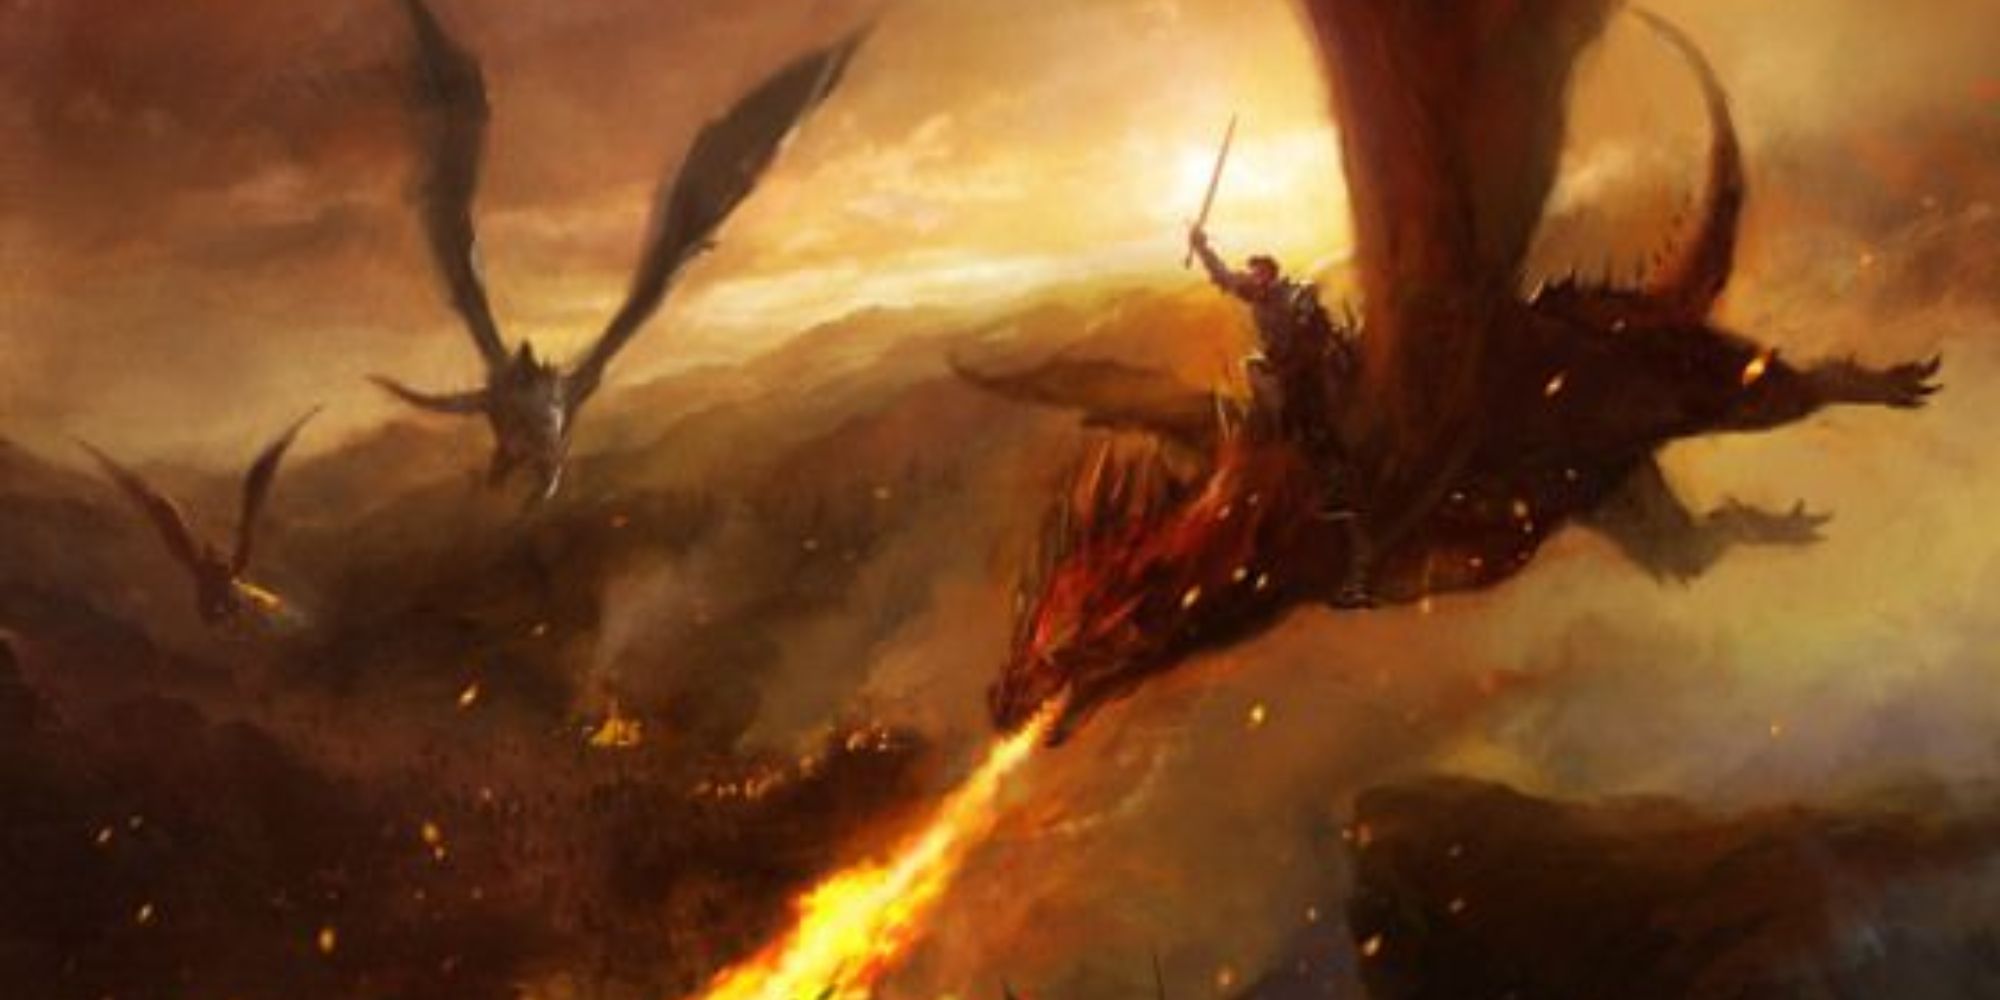 An image of Aegon flying on the back of Balerion in The Field of Fire